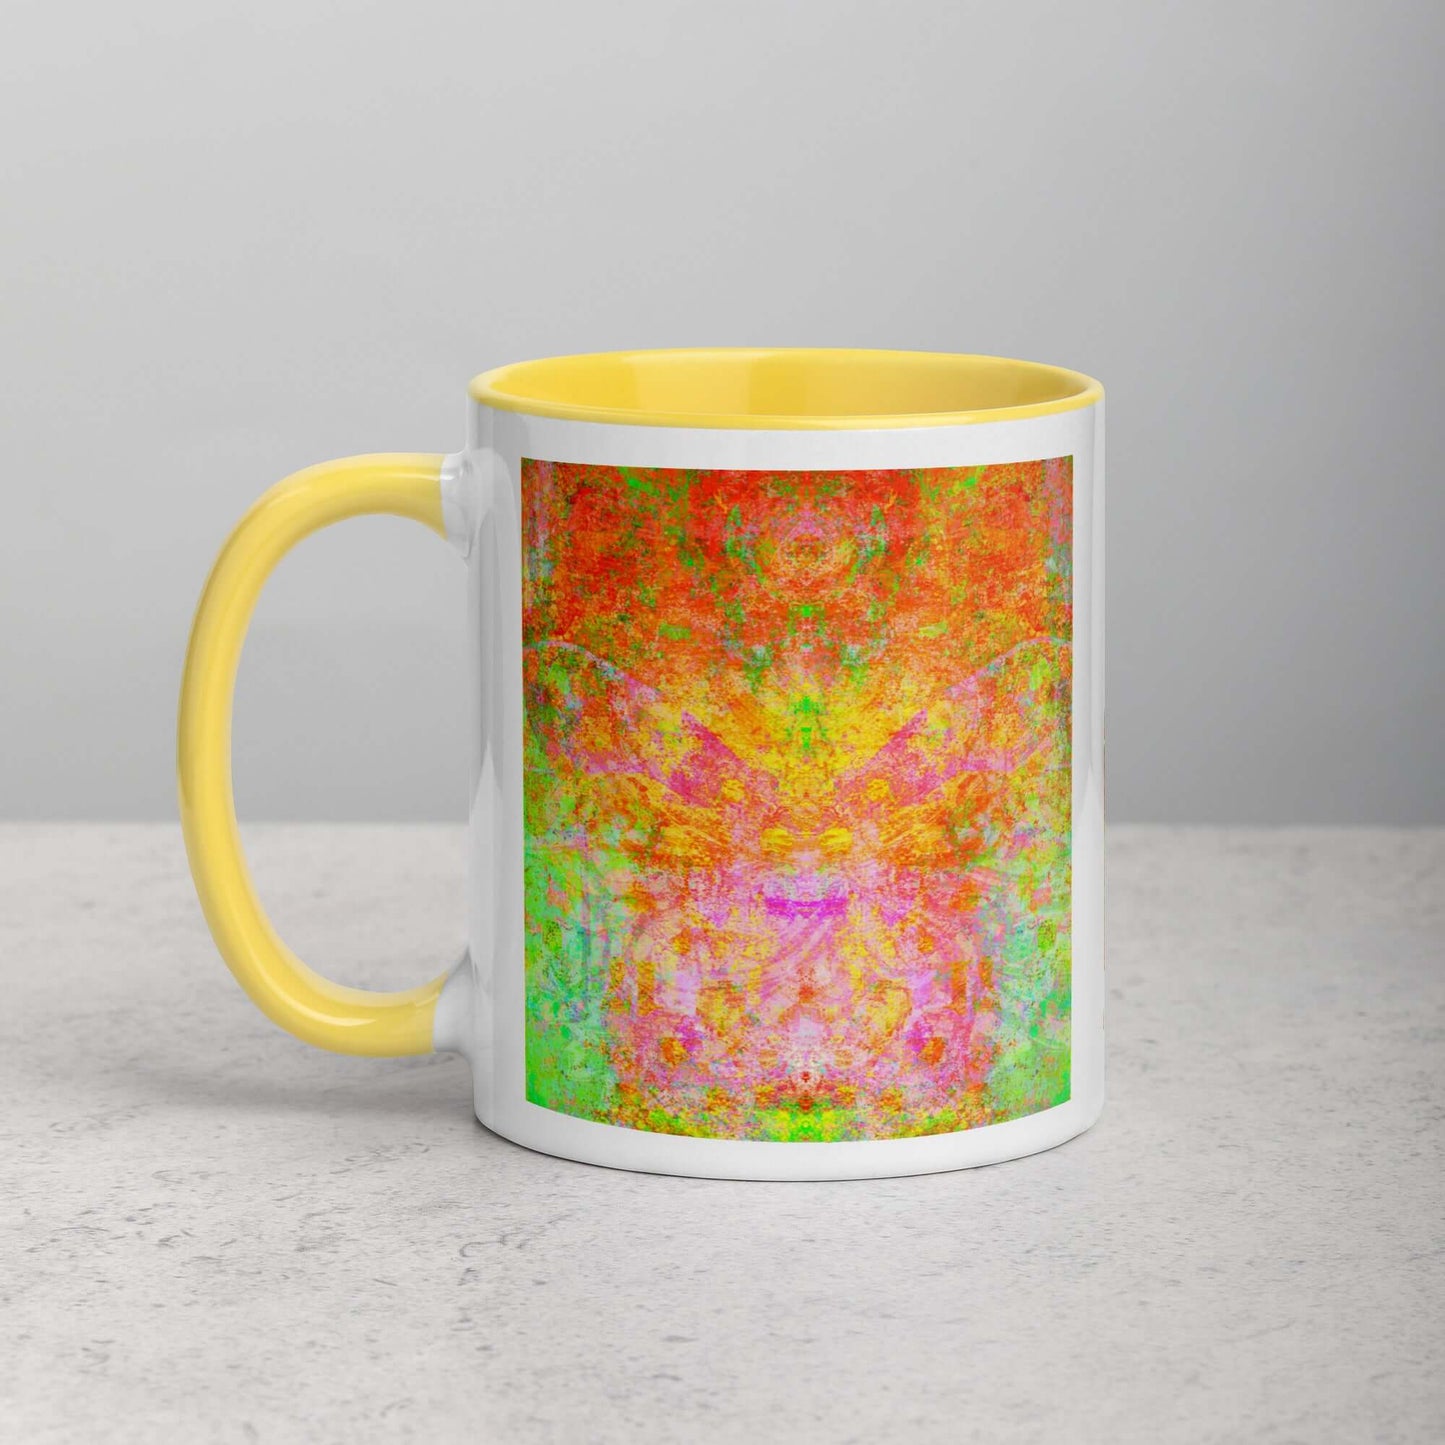 Green and Orange Butterfly Shaped “Firefly” Abstract Art Mug with Bright Yellow Color Inside Left Handed Front View